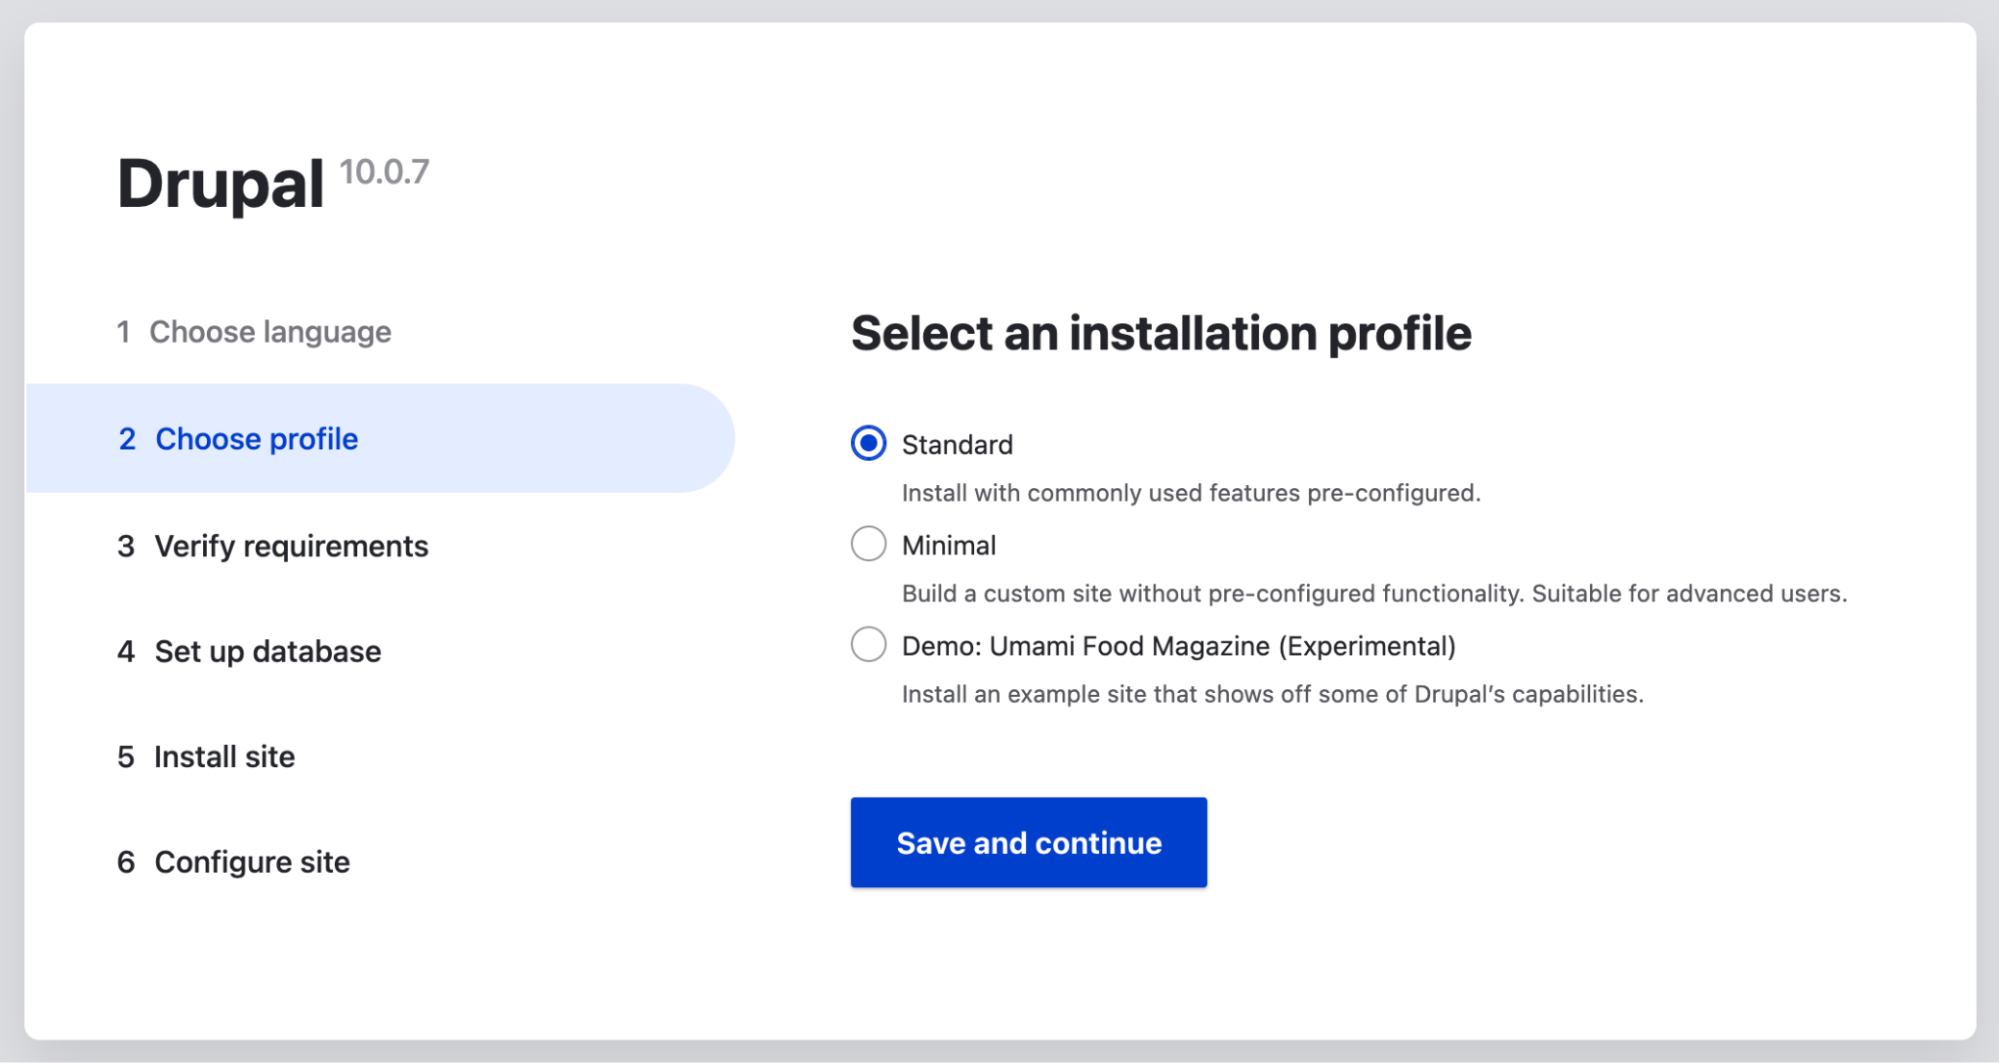 For the installation profile, select Standard. Click the Save and continue button to continue.